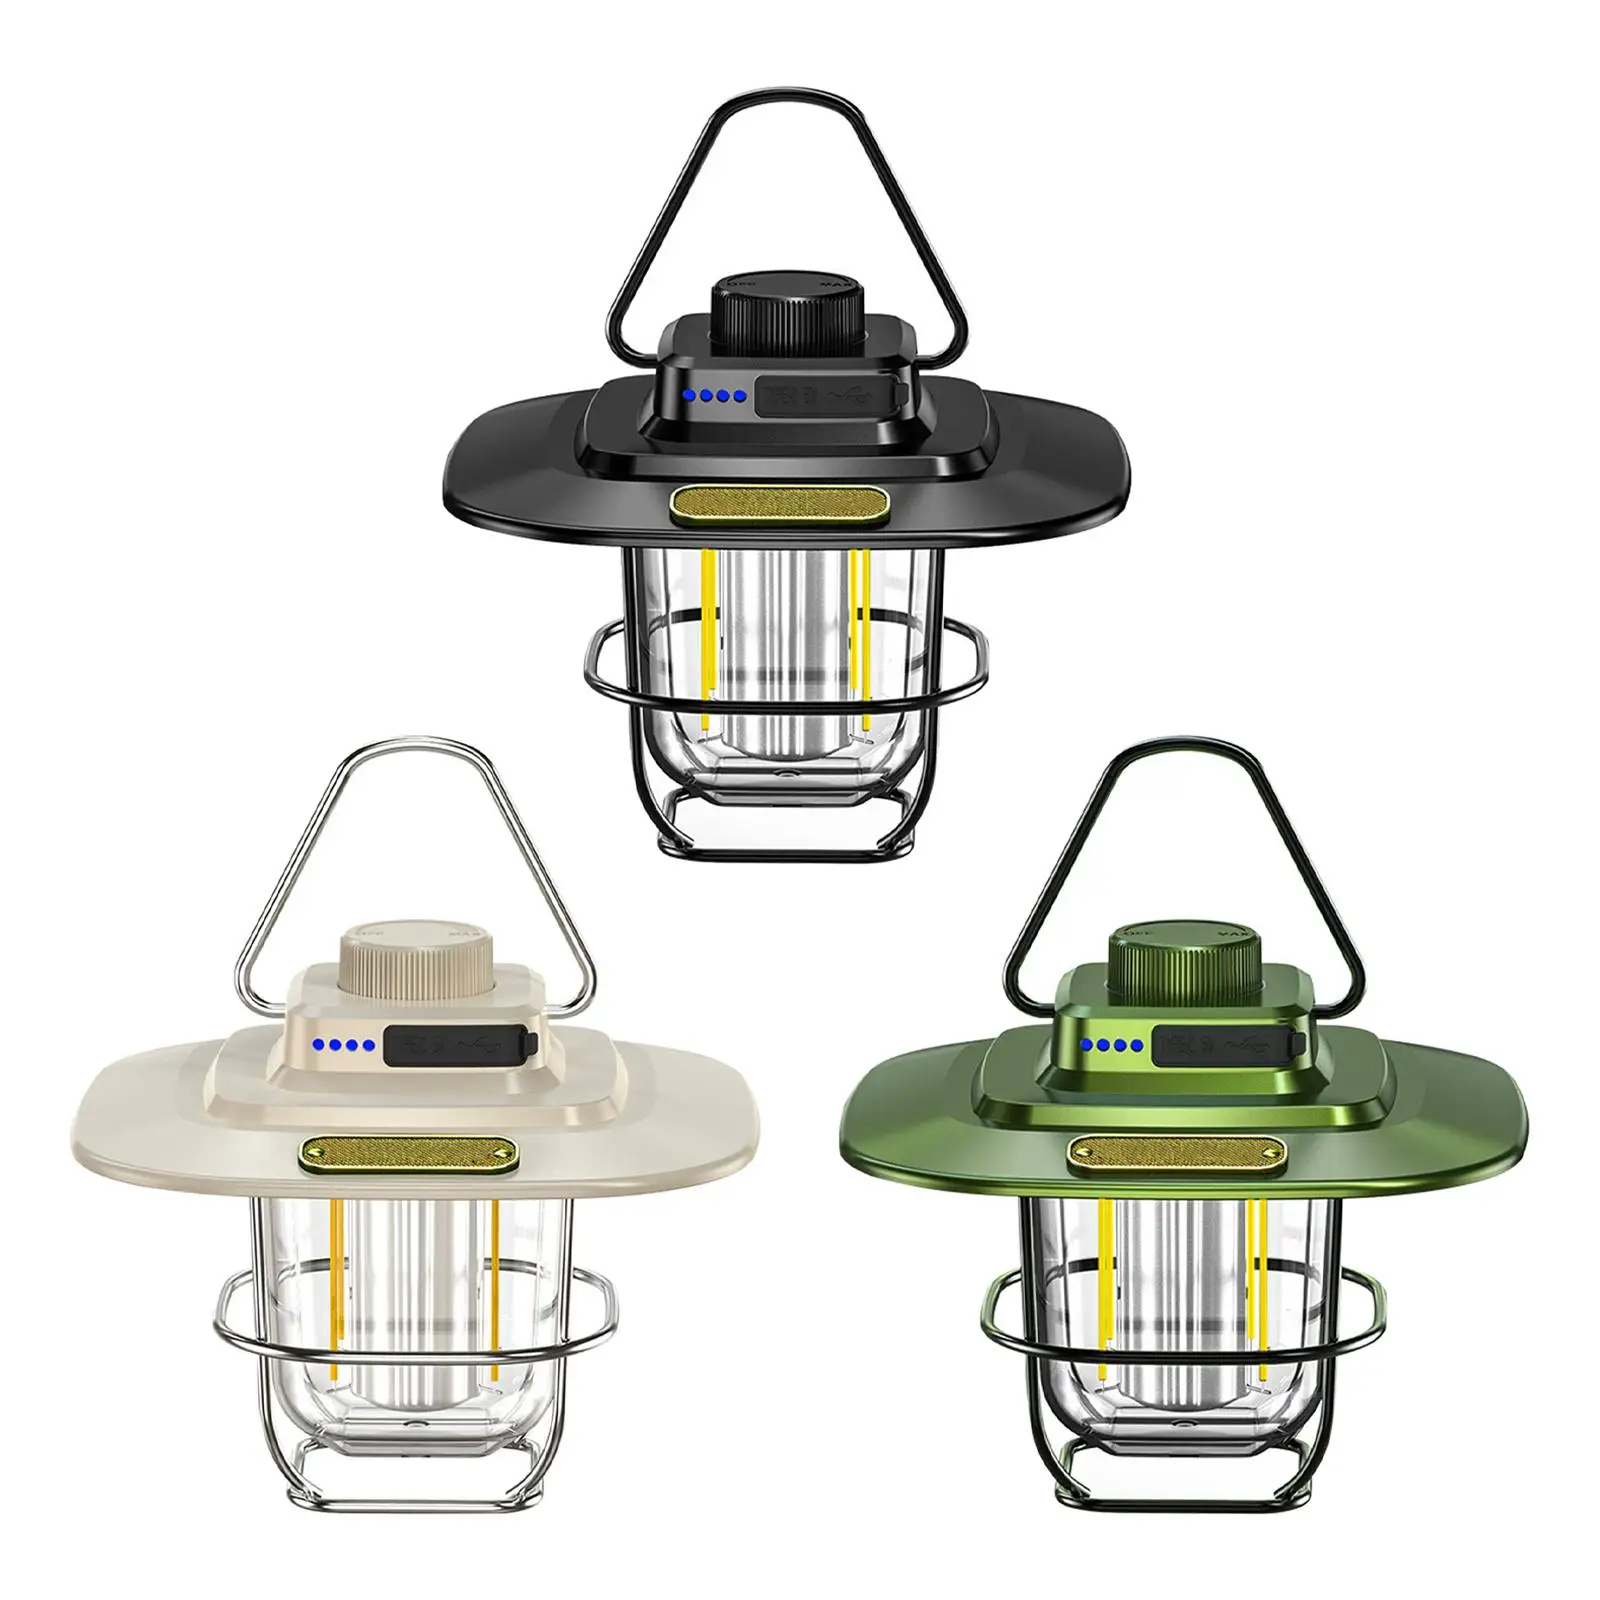 Stainless Steel LED Camping Lantern Night Light 2 Light Modes Lightweight Rechargeable Vintage Style Hanging for Hiking Garden